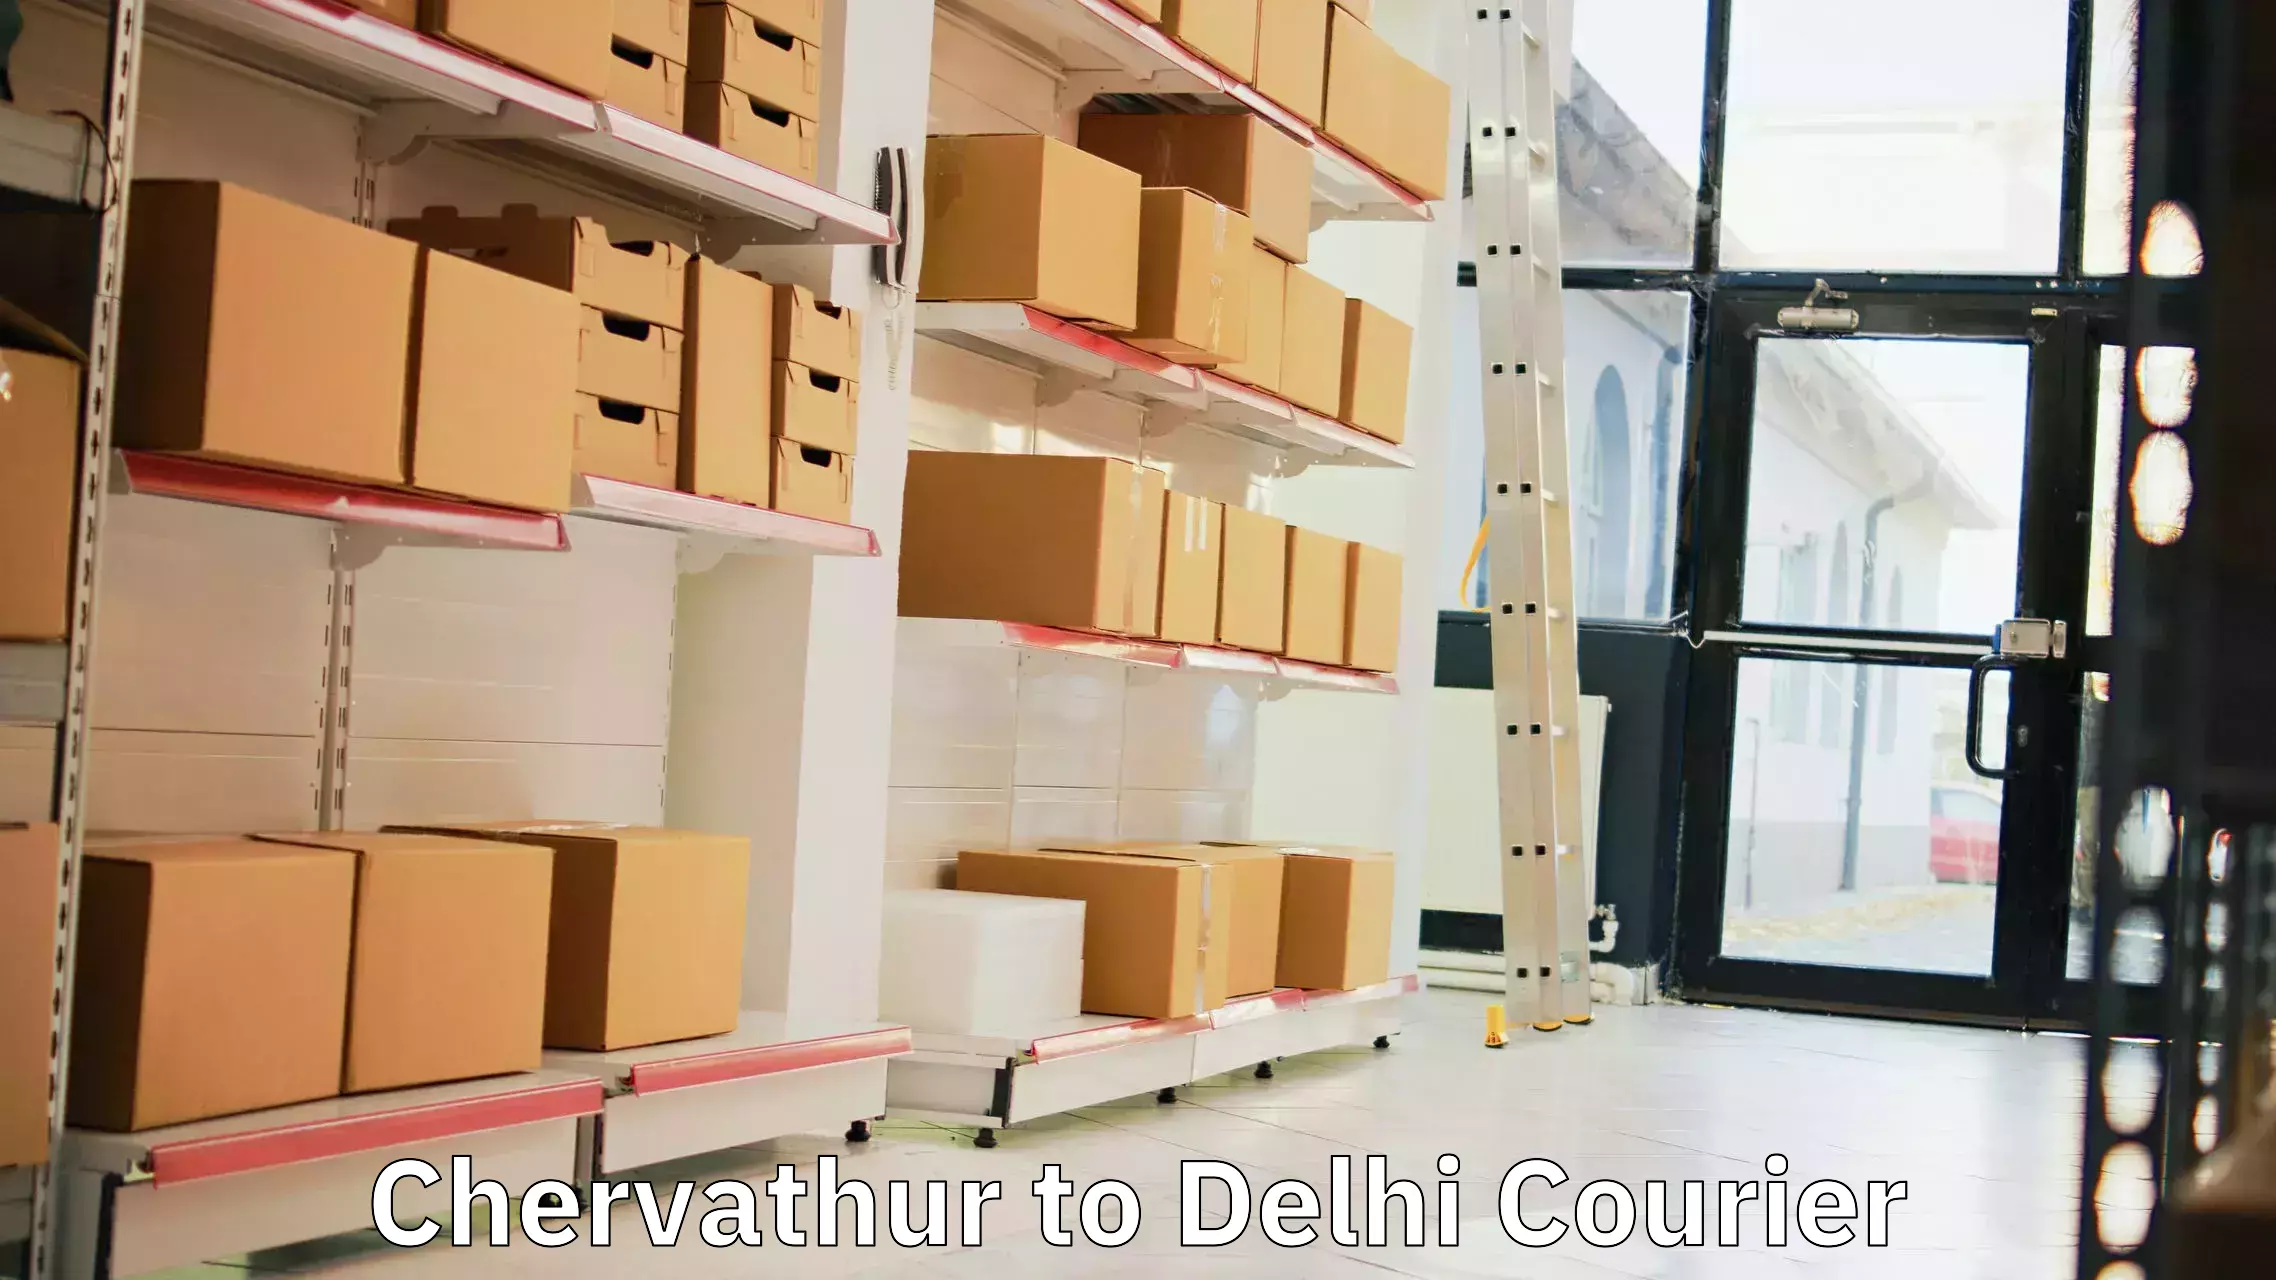 On-demand shipping options Chervathur to Lodhi Road